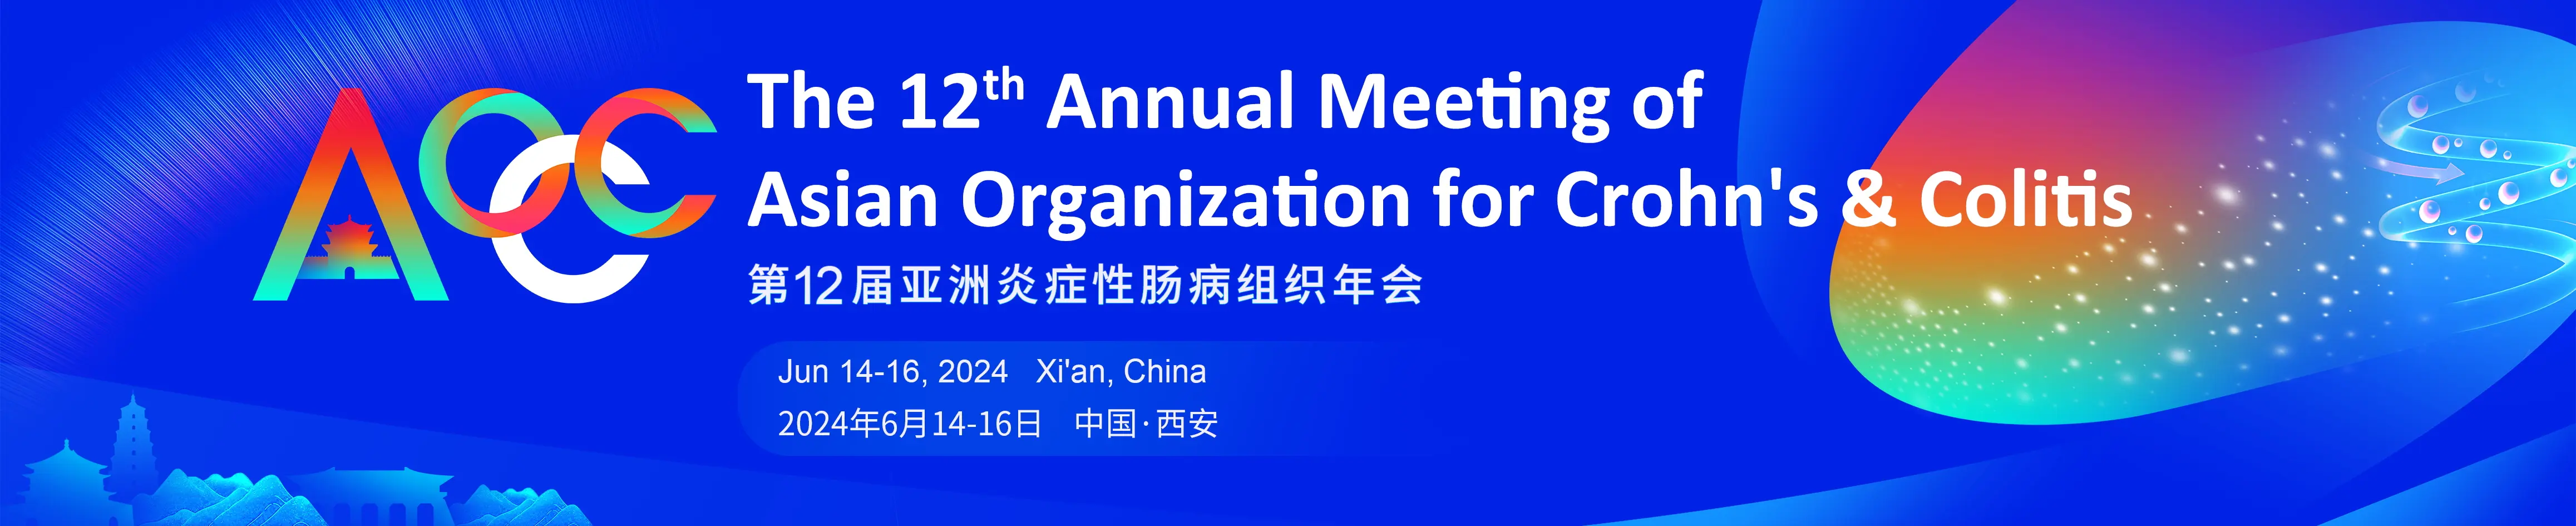 The 12ᵗʰ Annual Meeting of Asian Organization for Crohn's & Colitis